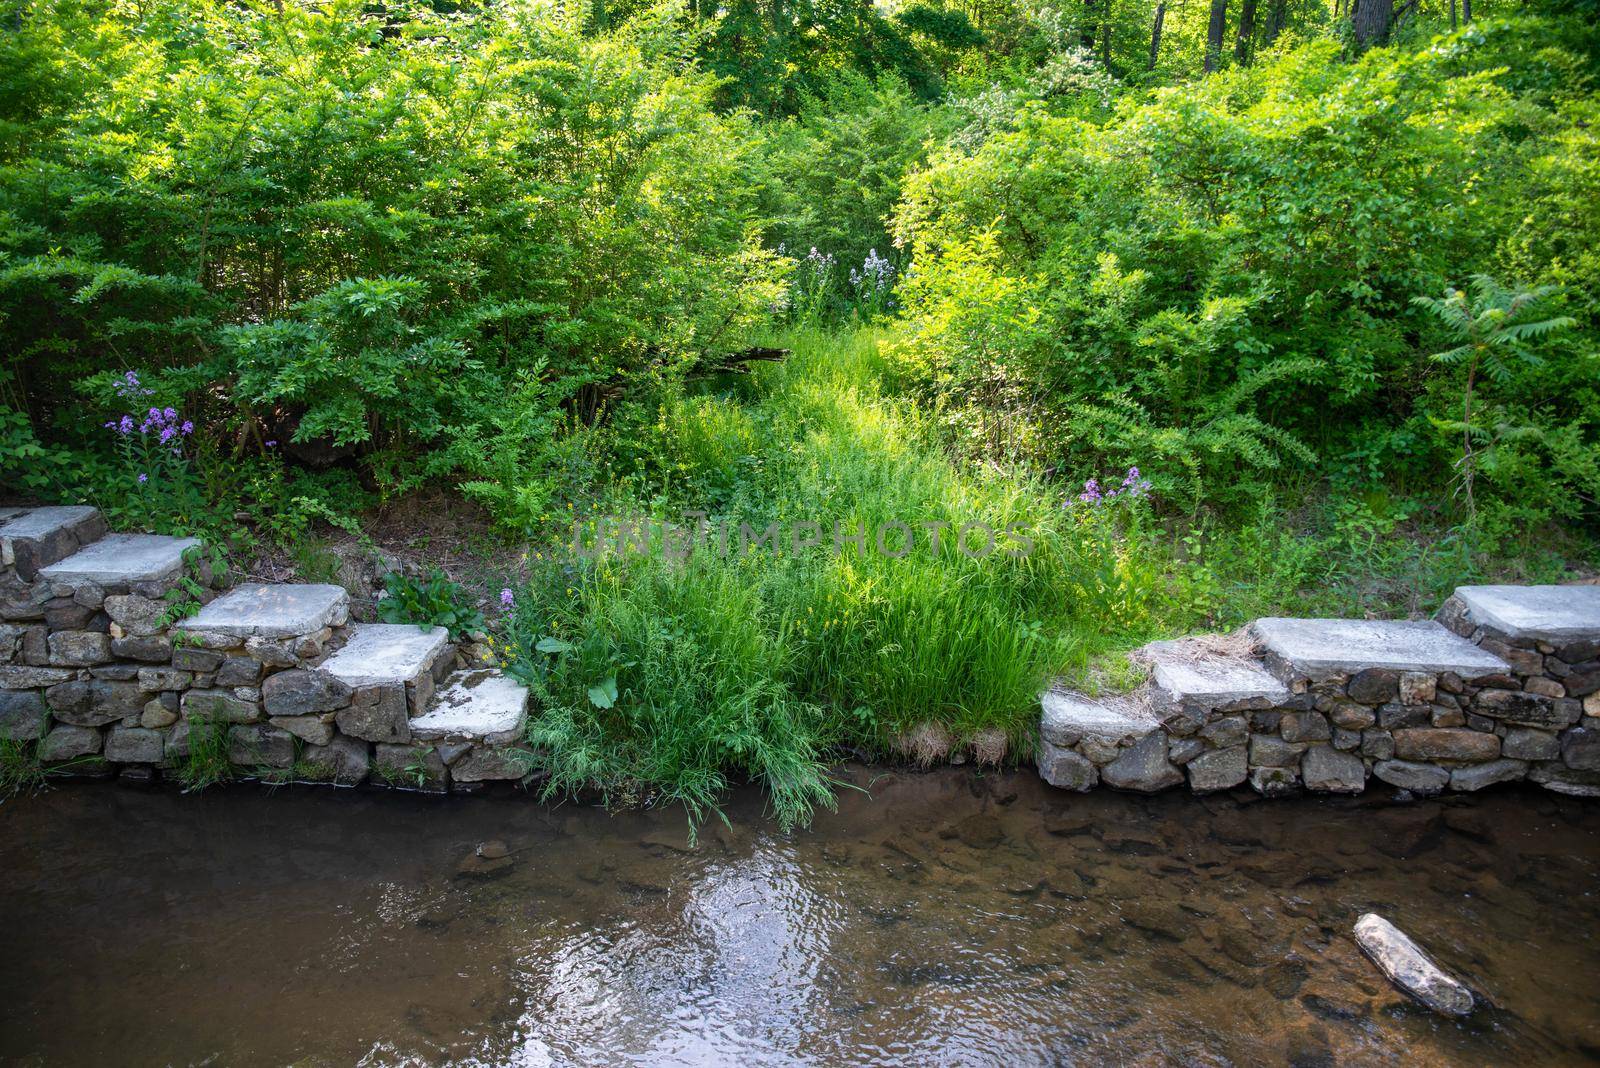 Double antique stone steps by green lush woodland descend to calm flowing stream. High quality photo